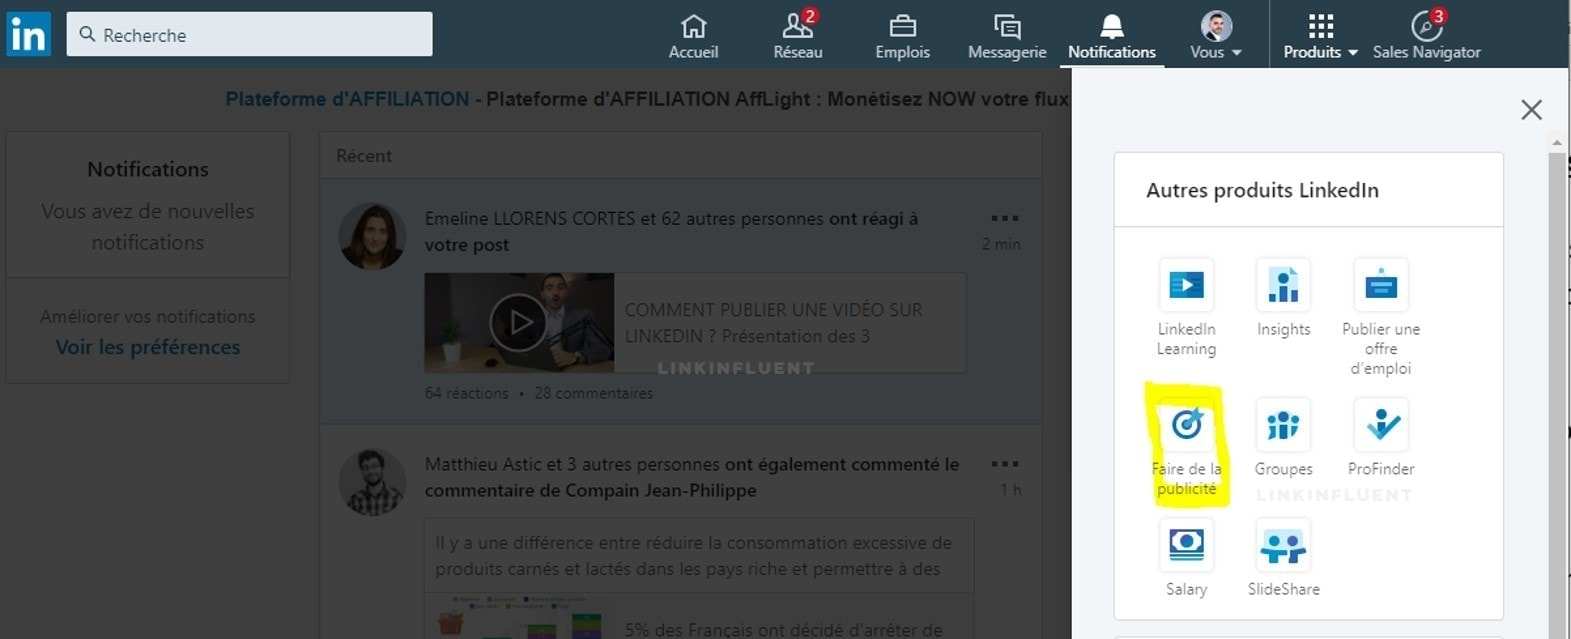 Pixel LinkedIn and LinkedIn insight tag - LinkedIn tutorial in French - Proinfluent